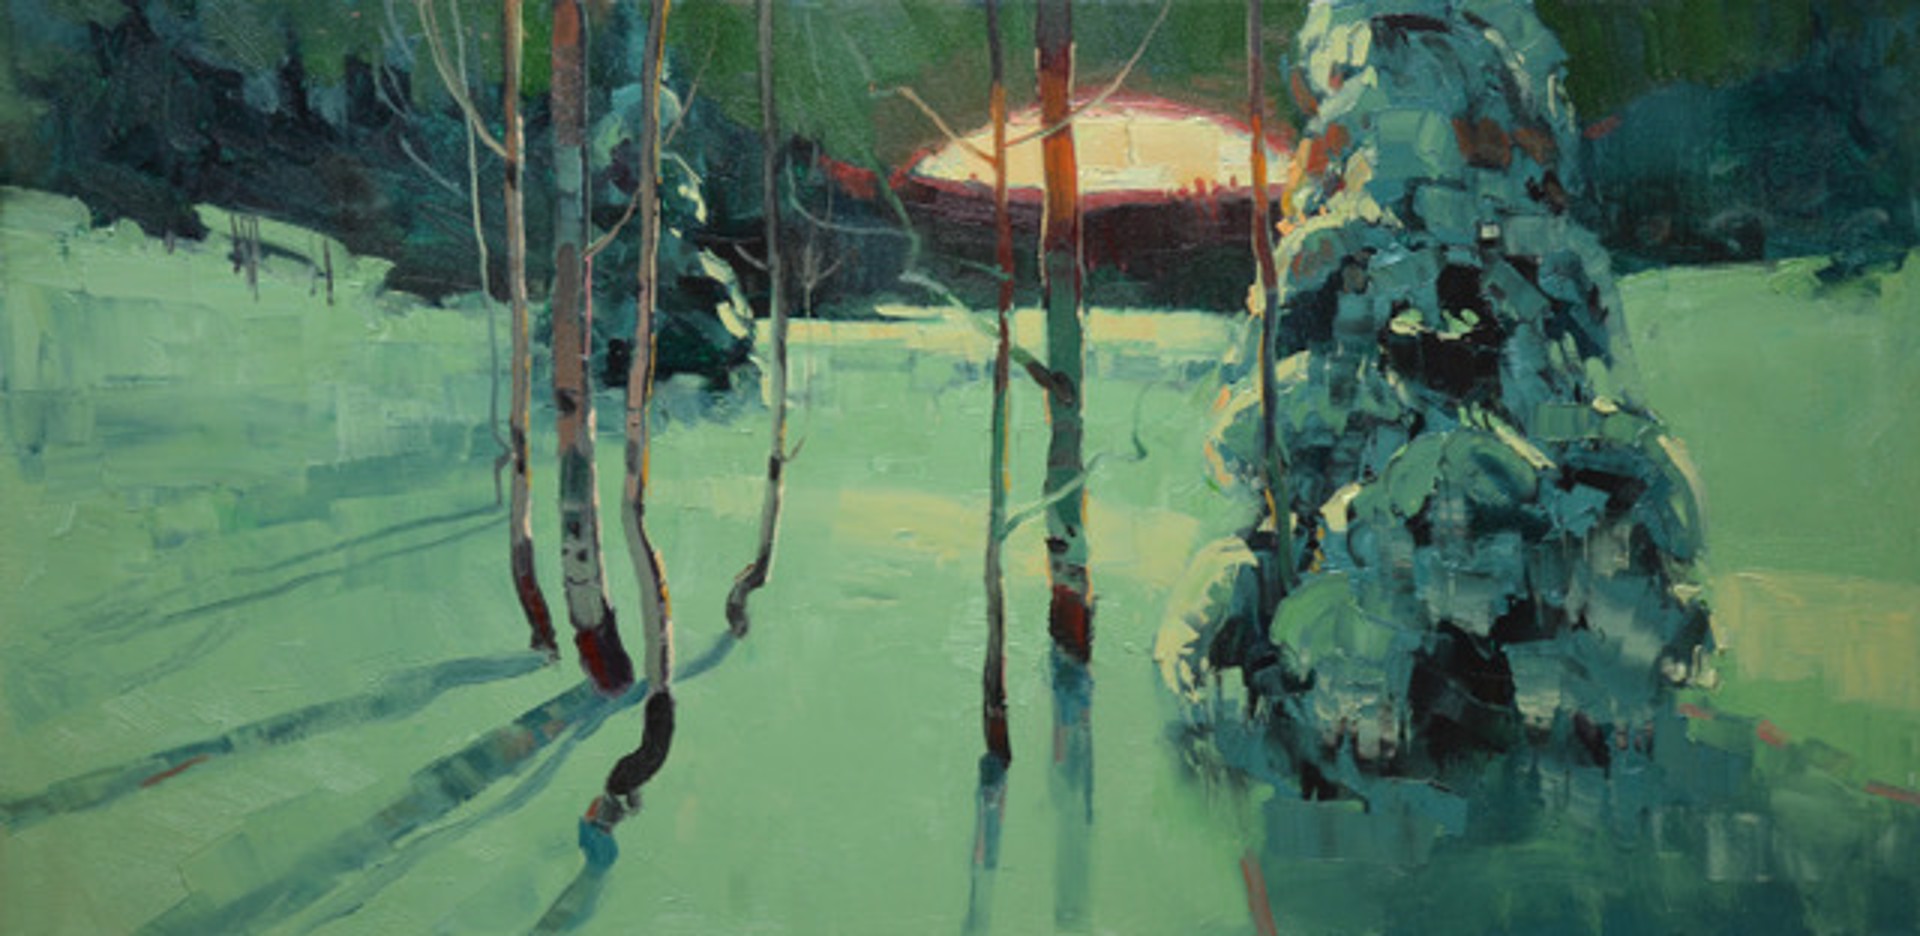 Original Oil Painting Of The Sun Rising Through Trees Over A Blue Tinted Snowy Landscape By Silas Thompson Available At Gallery Wild 